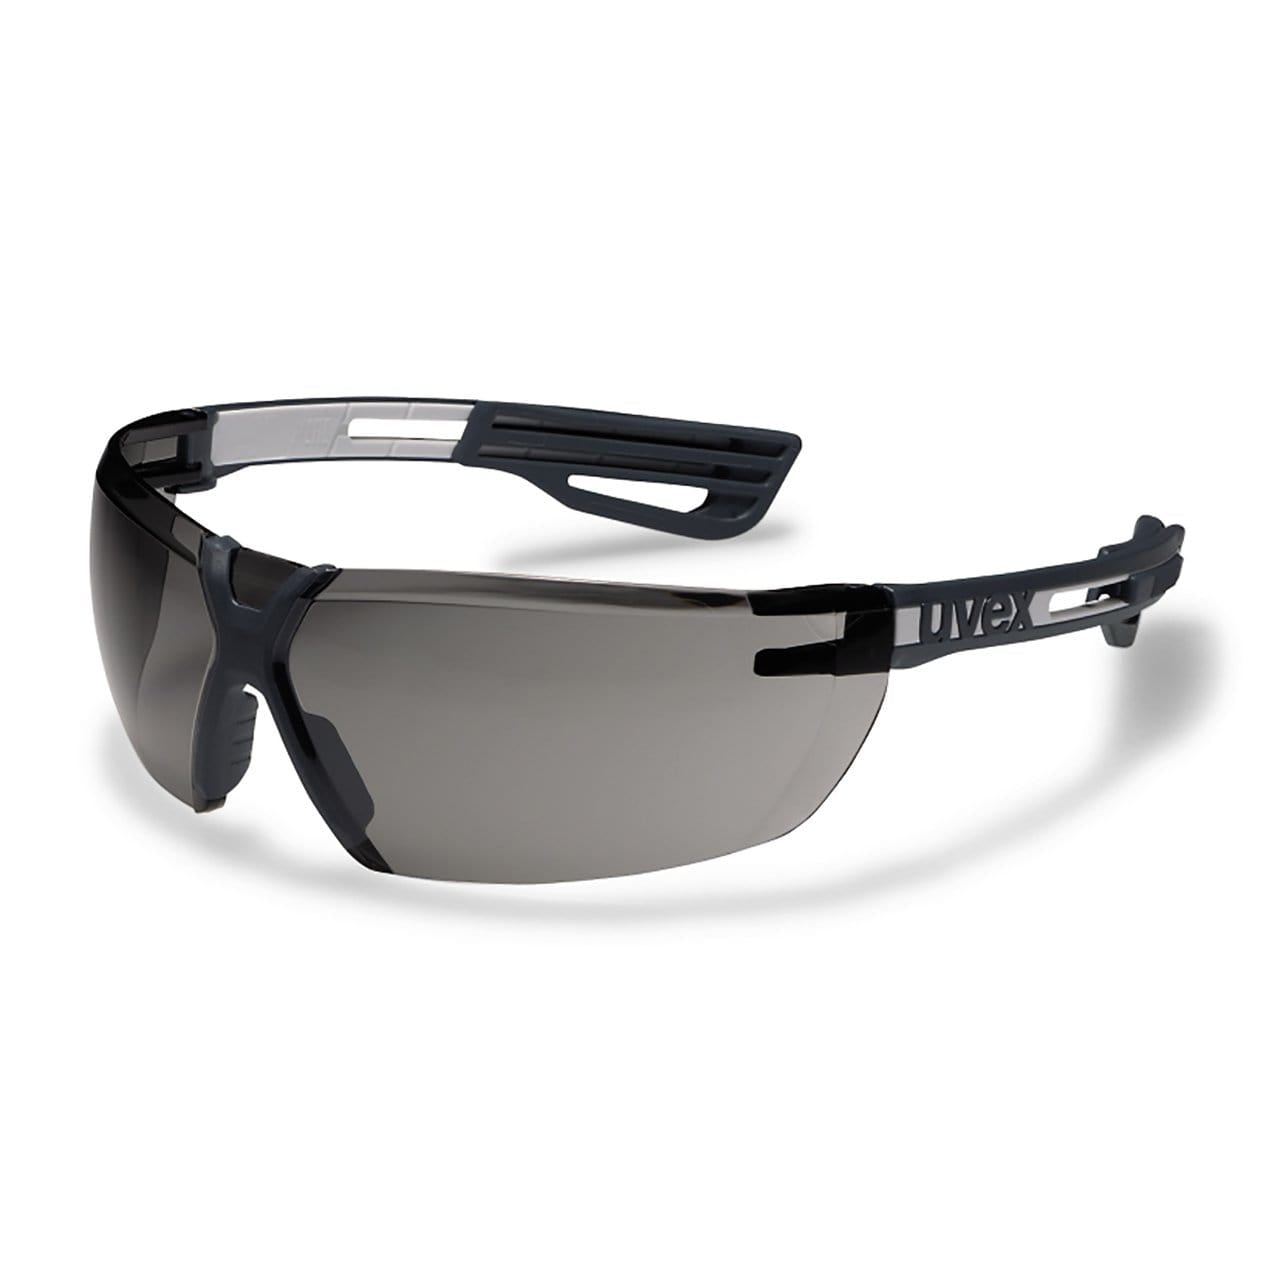 UVEX X-Fit Pro Eye Protection Spectacles